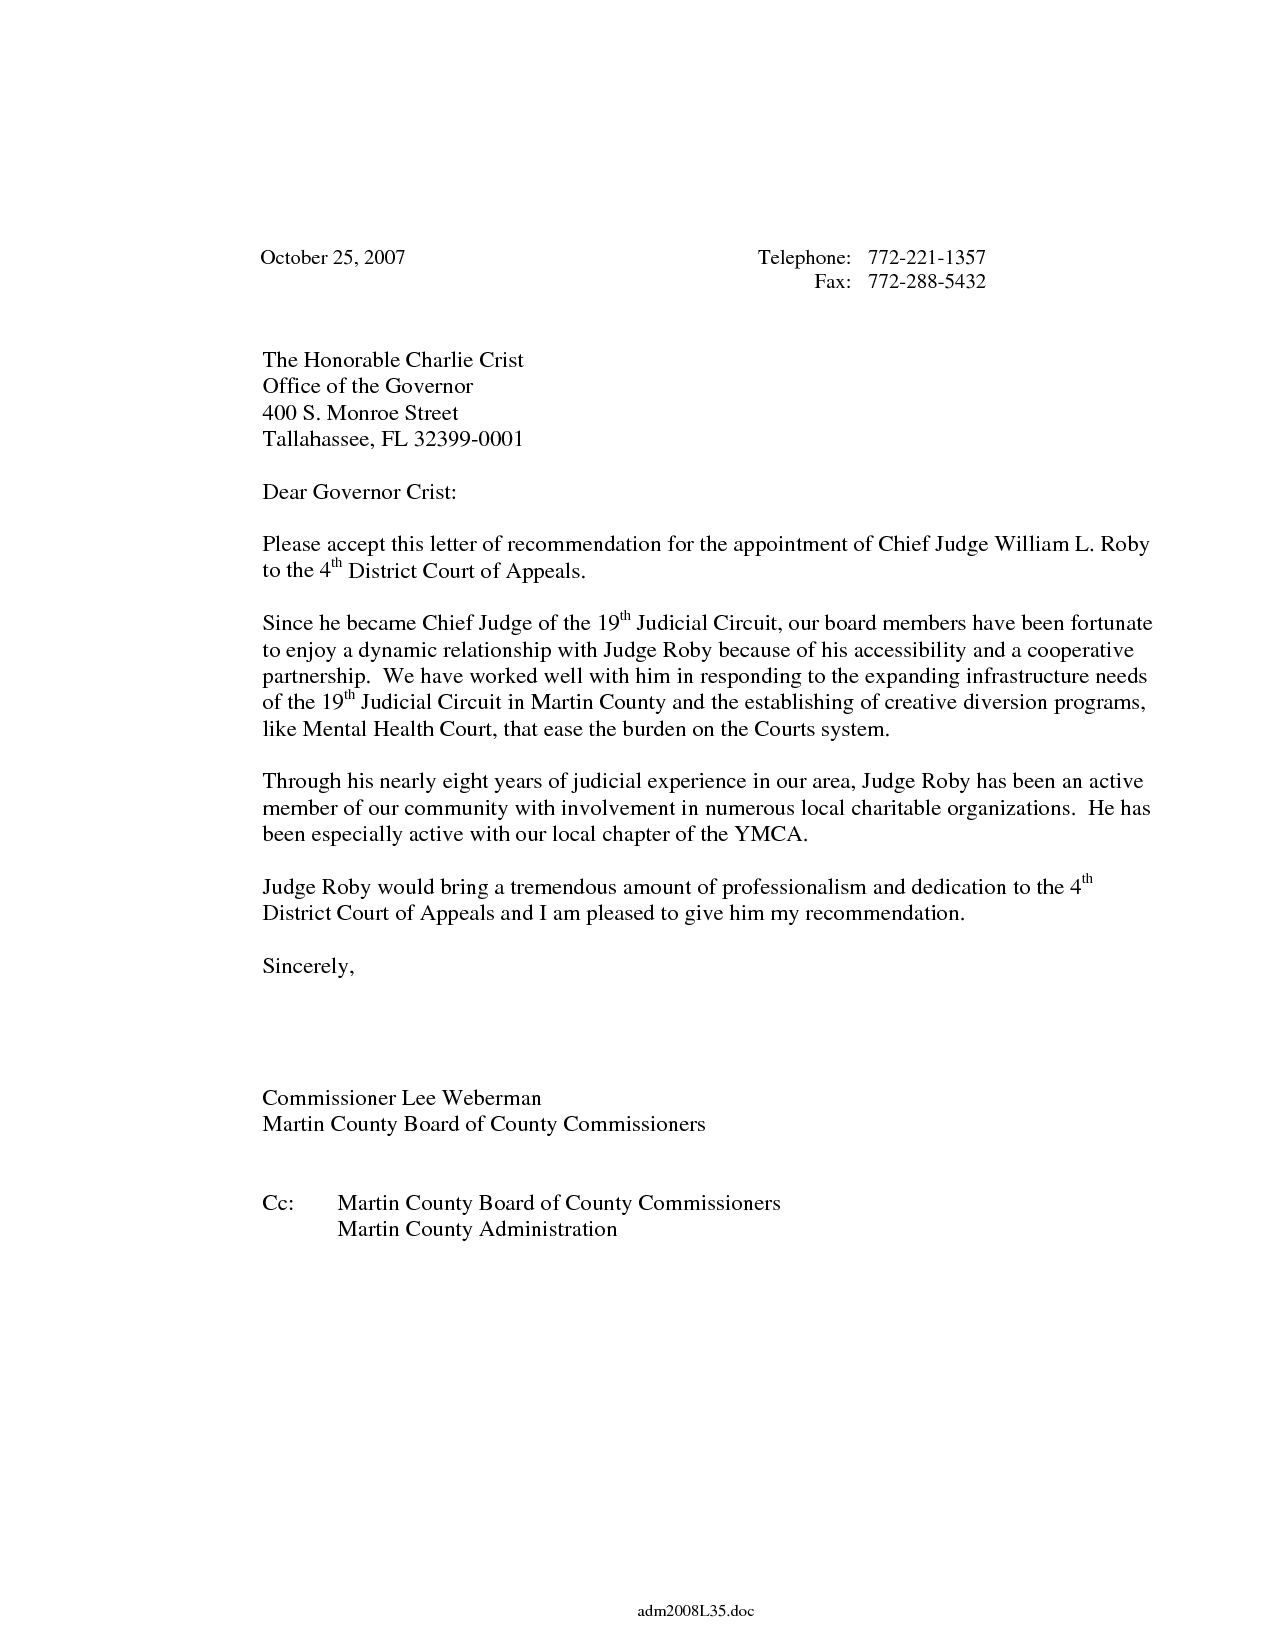 Recommendation Letter For Judge Akali throughout dimensions 1275 X 1650